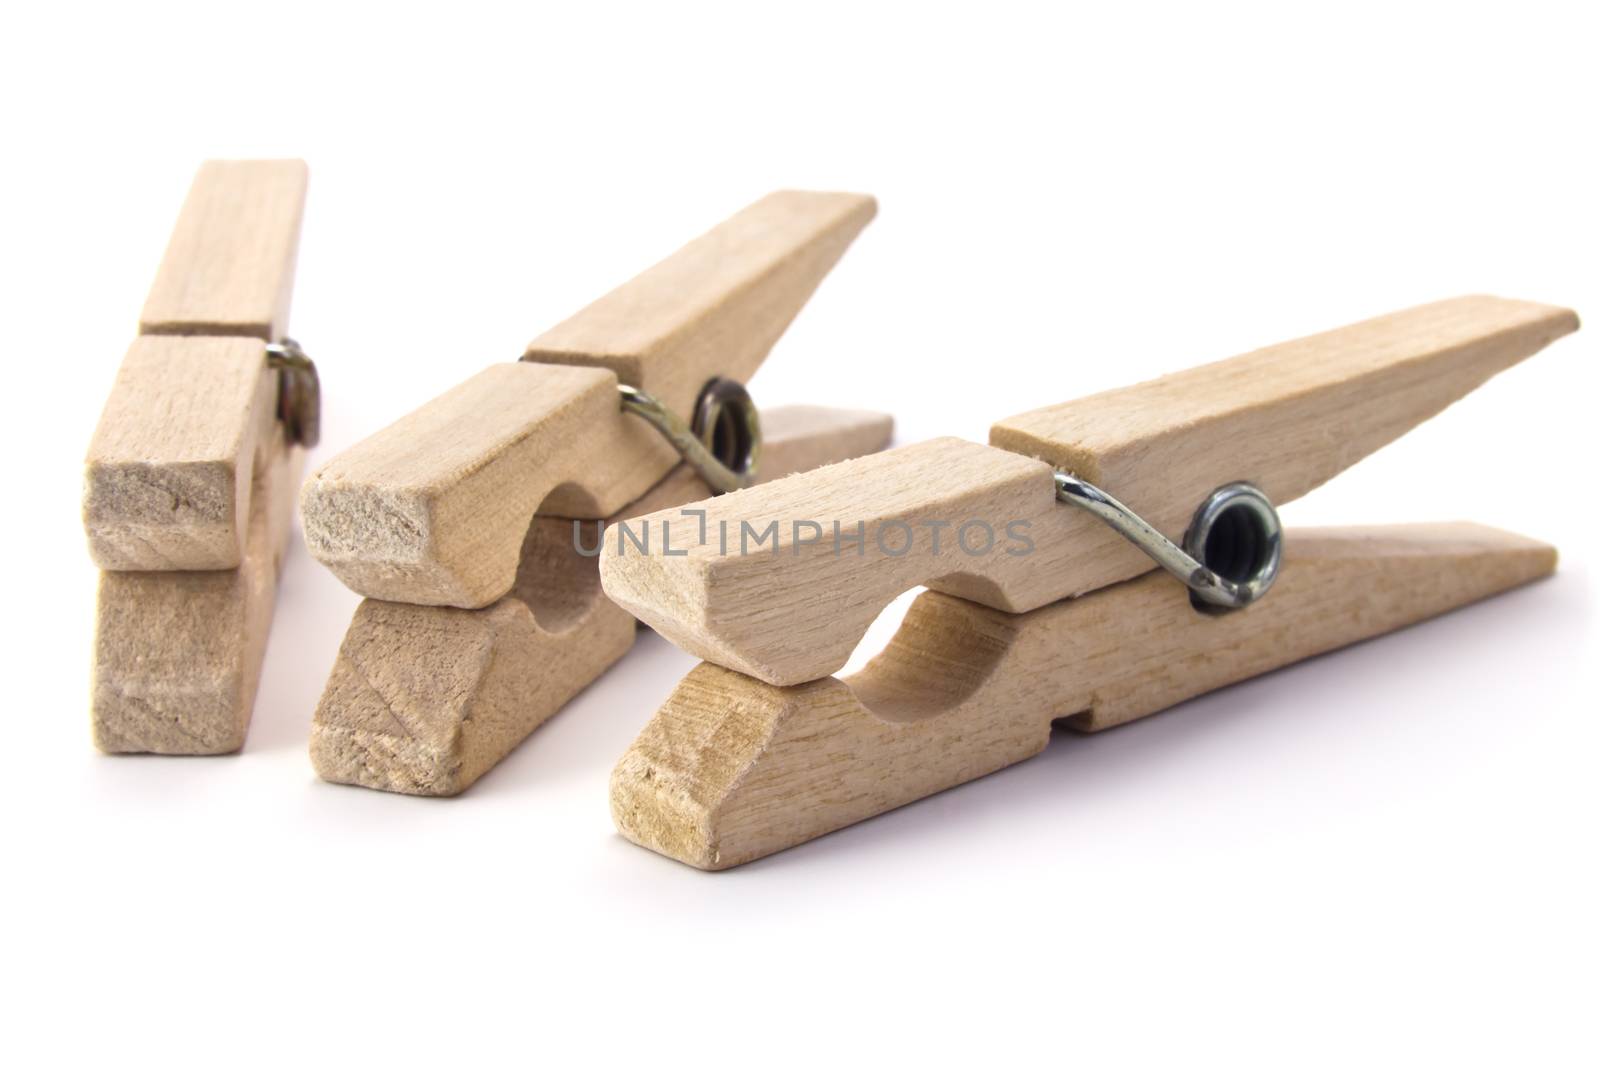  three wooden clothes pegs isolated on white background